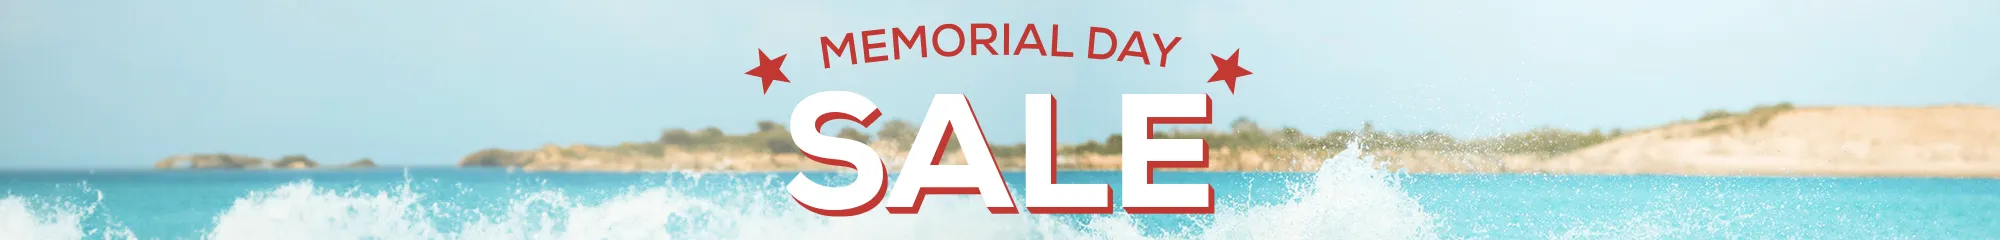 Memorial Day Sale - Up to 40% Off